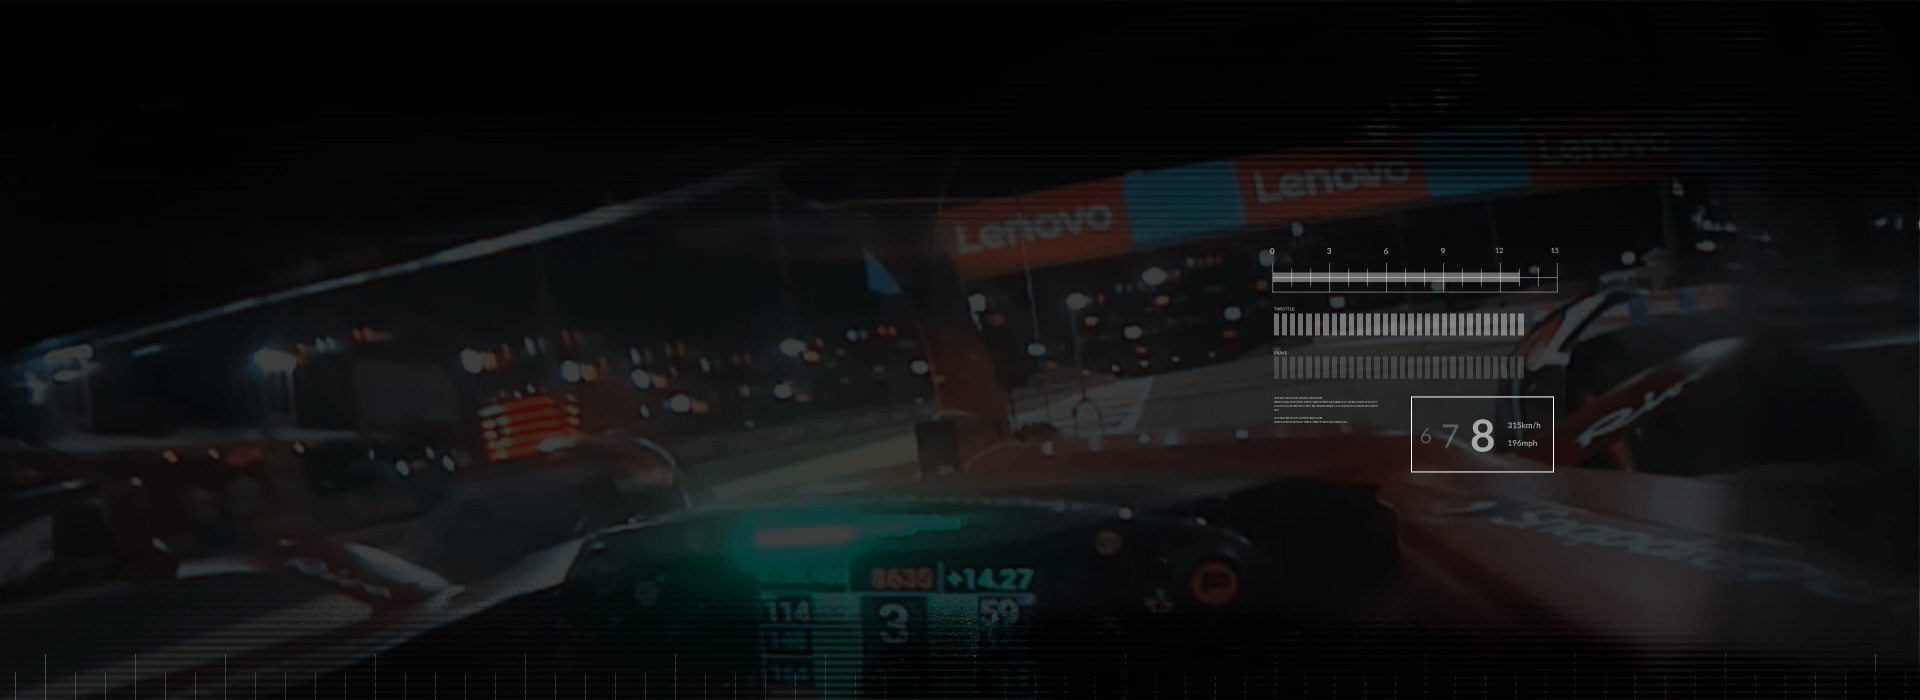 Interior perspective of a F1 race car driver passing Lenovo banners on a track